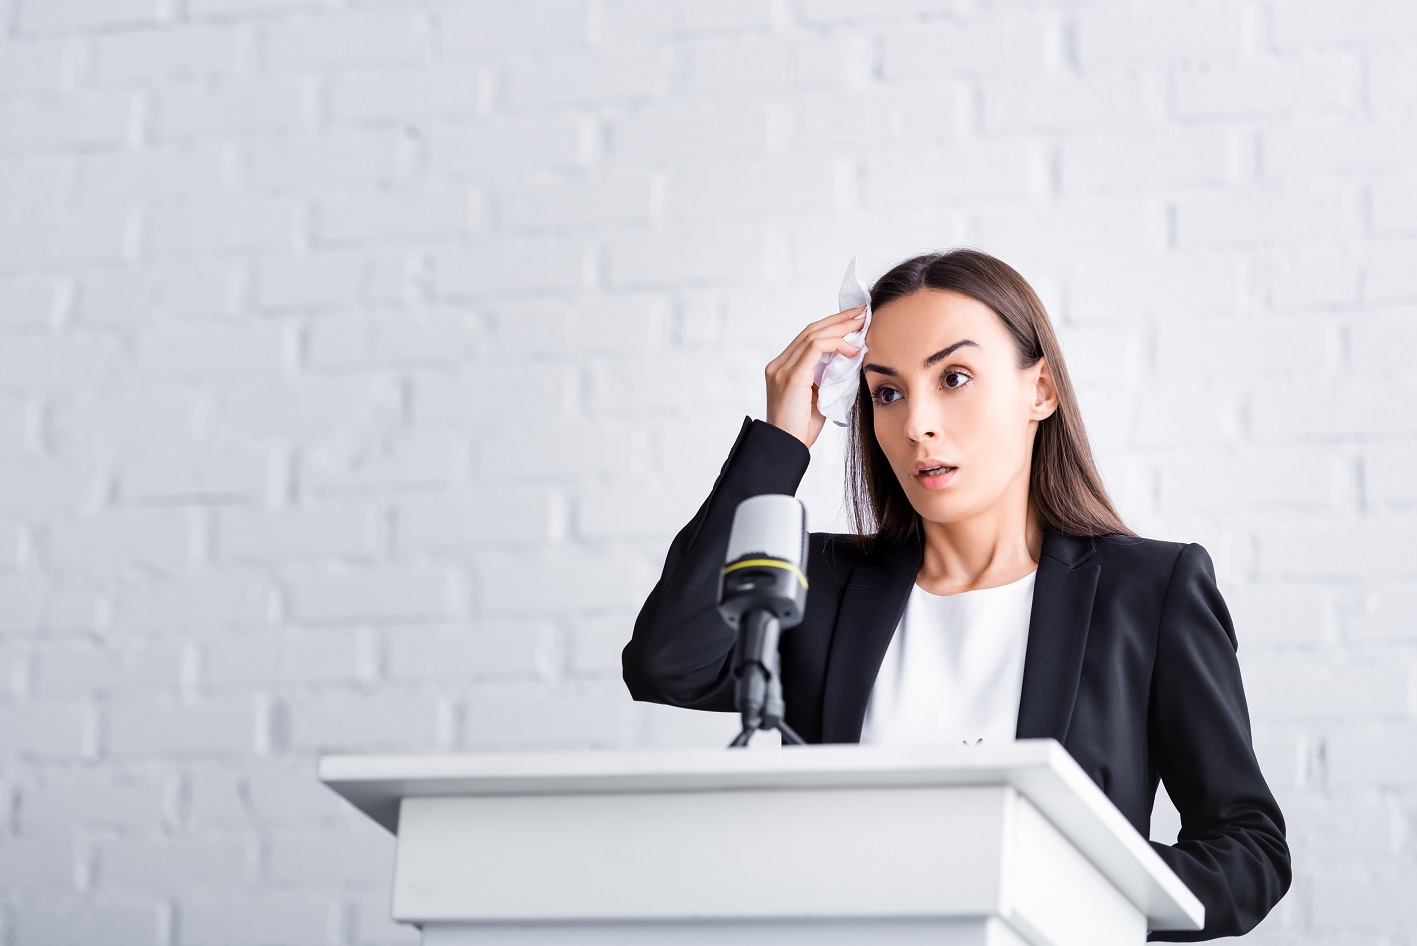 Learn how to overcome public speaking fear and anxiety